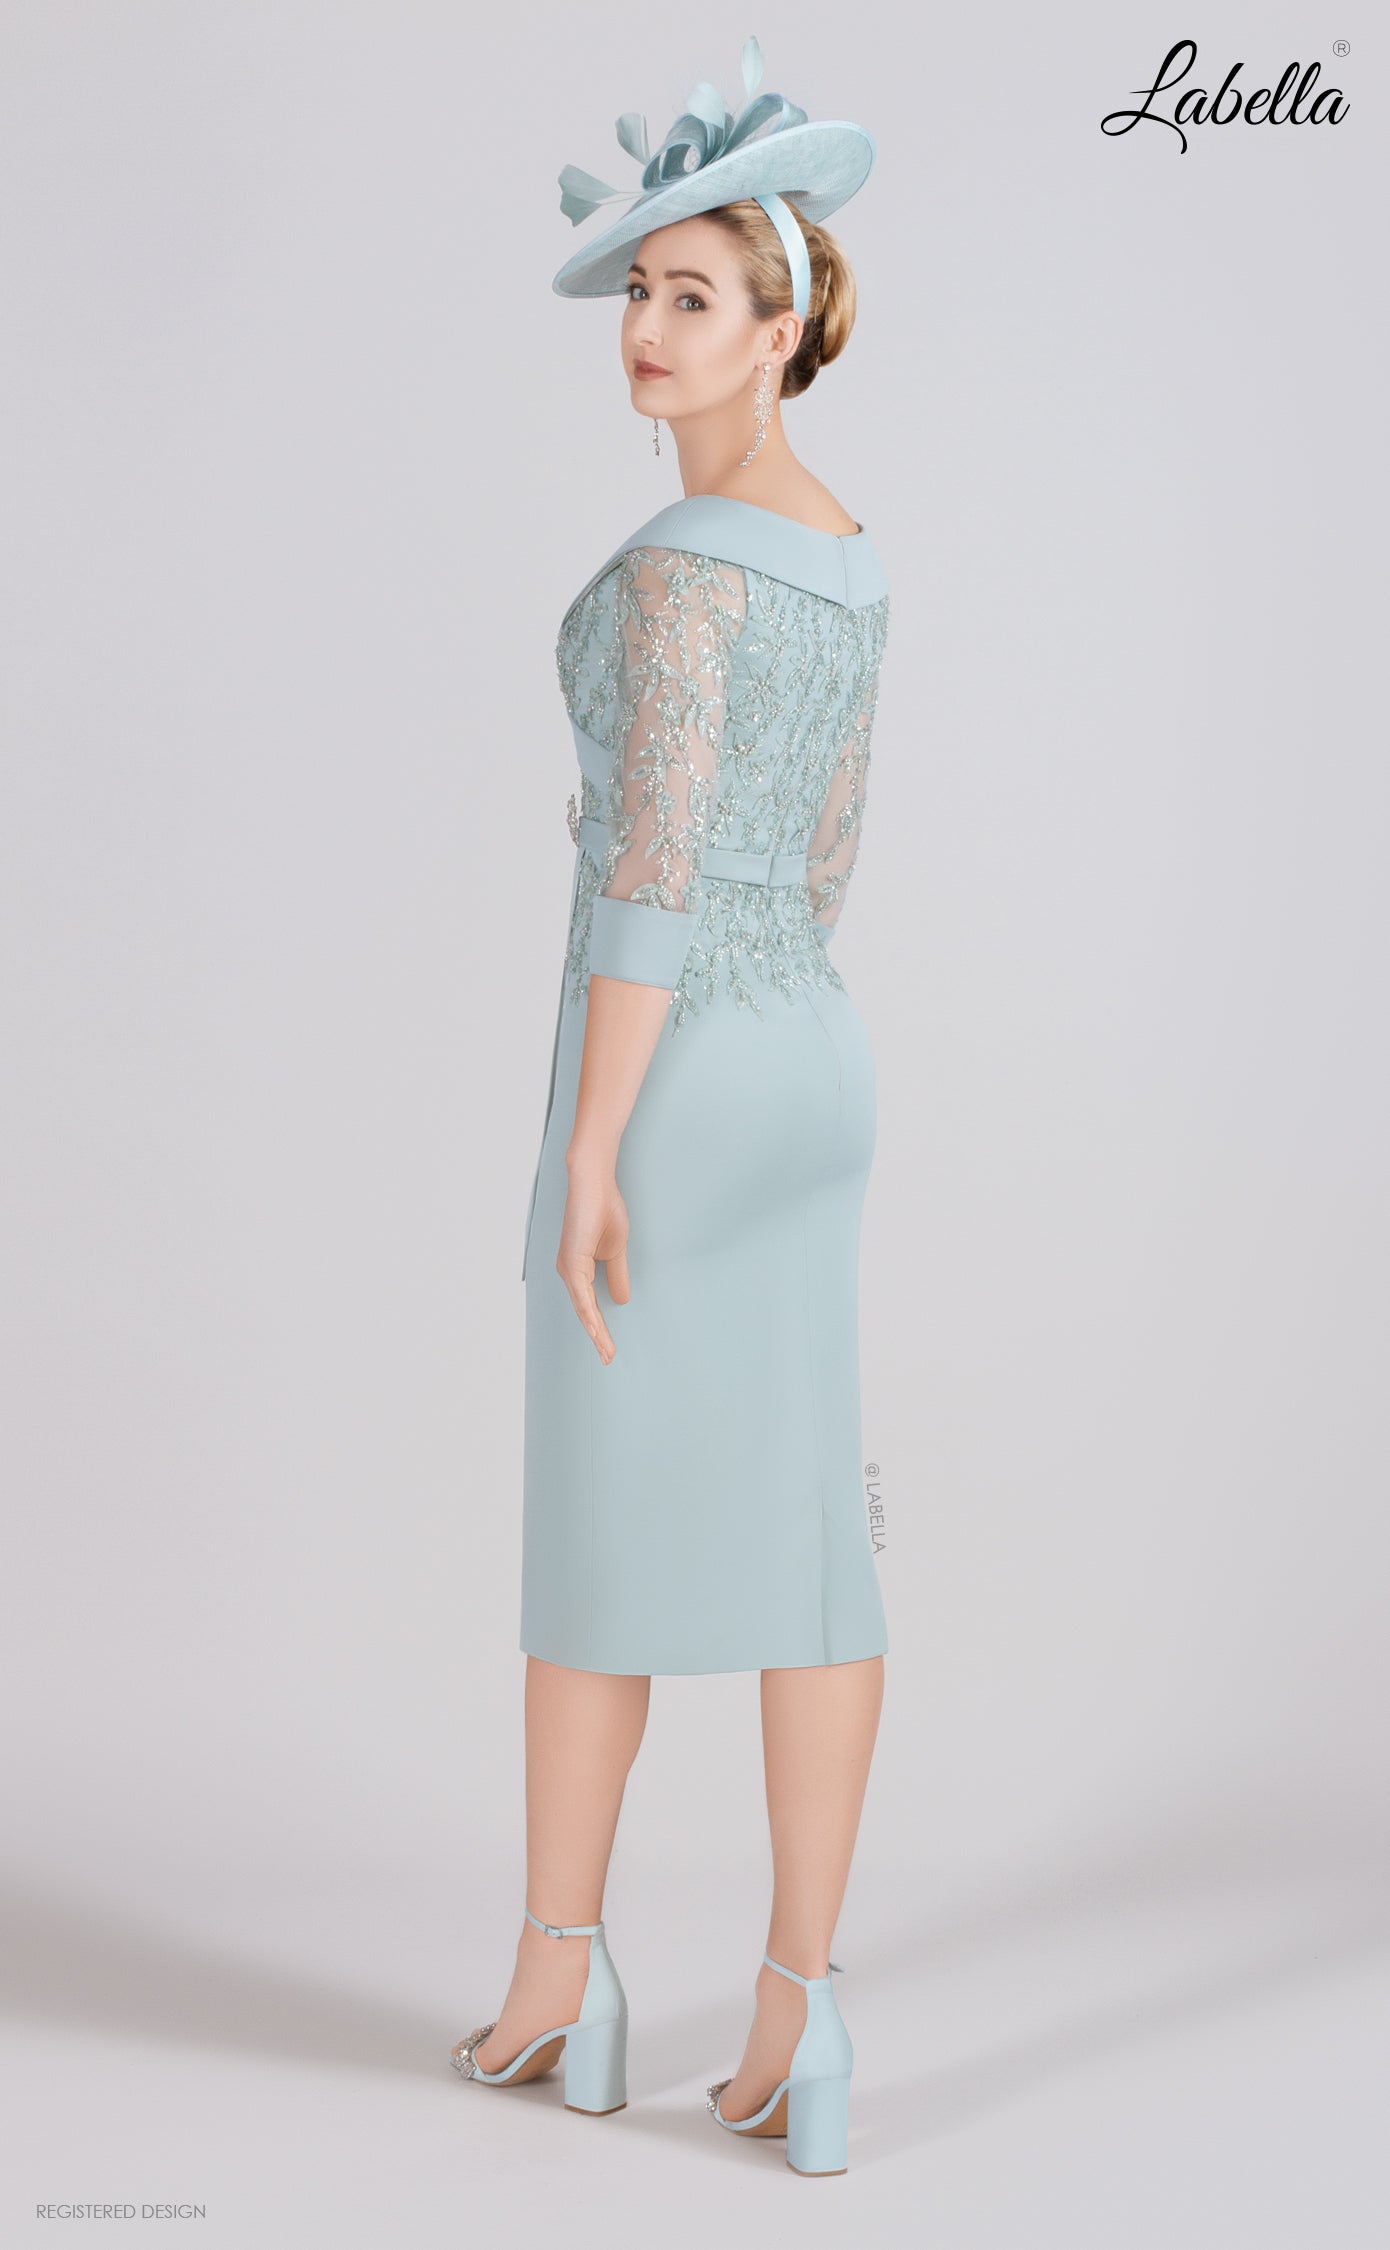 Duckegg Dress with Sheer Sleeve and Floral Beading Detail